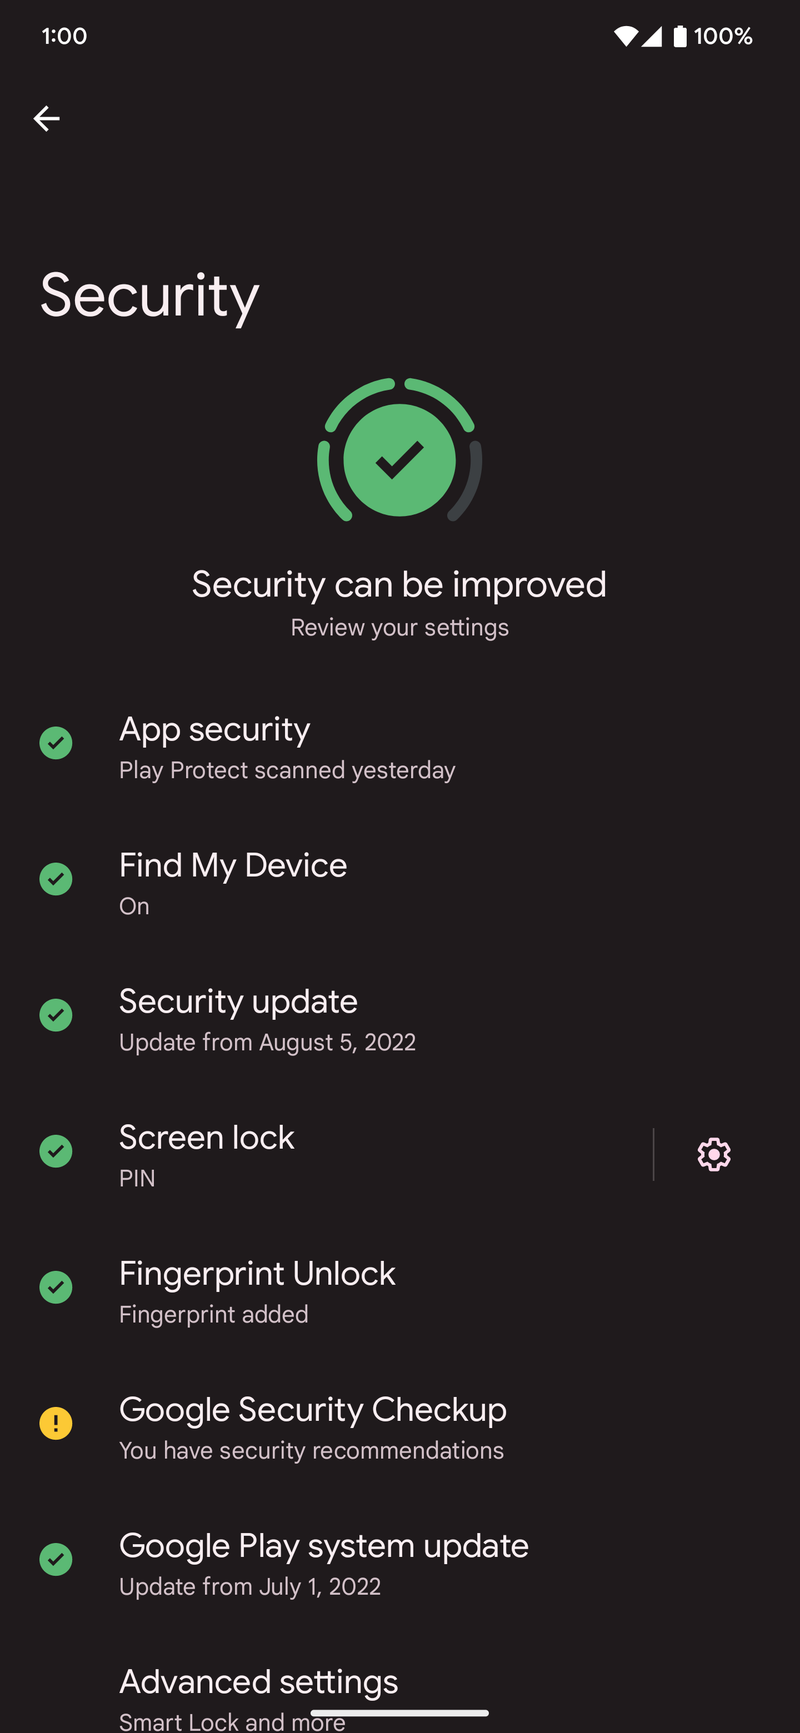 Android 13 new security dashboard